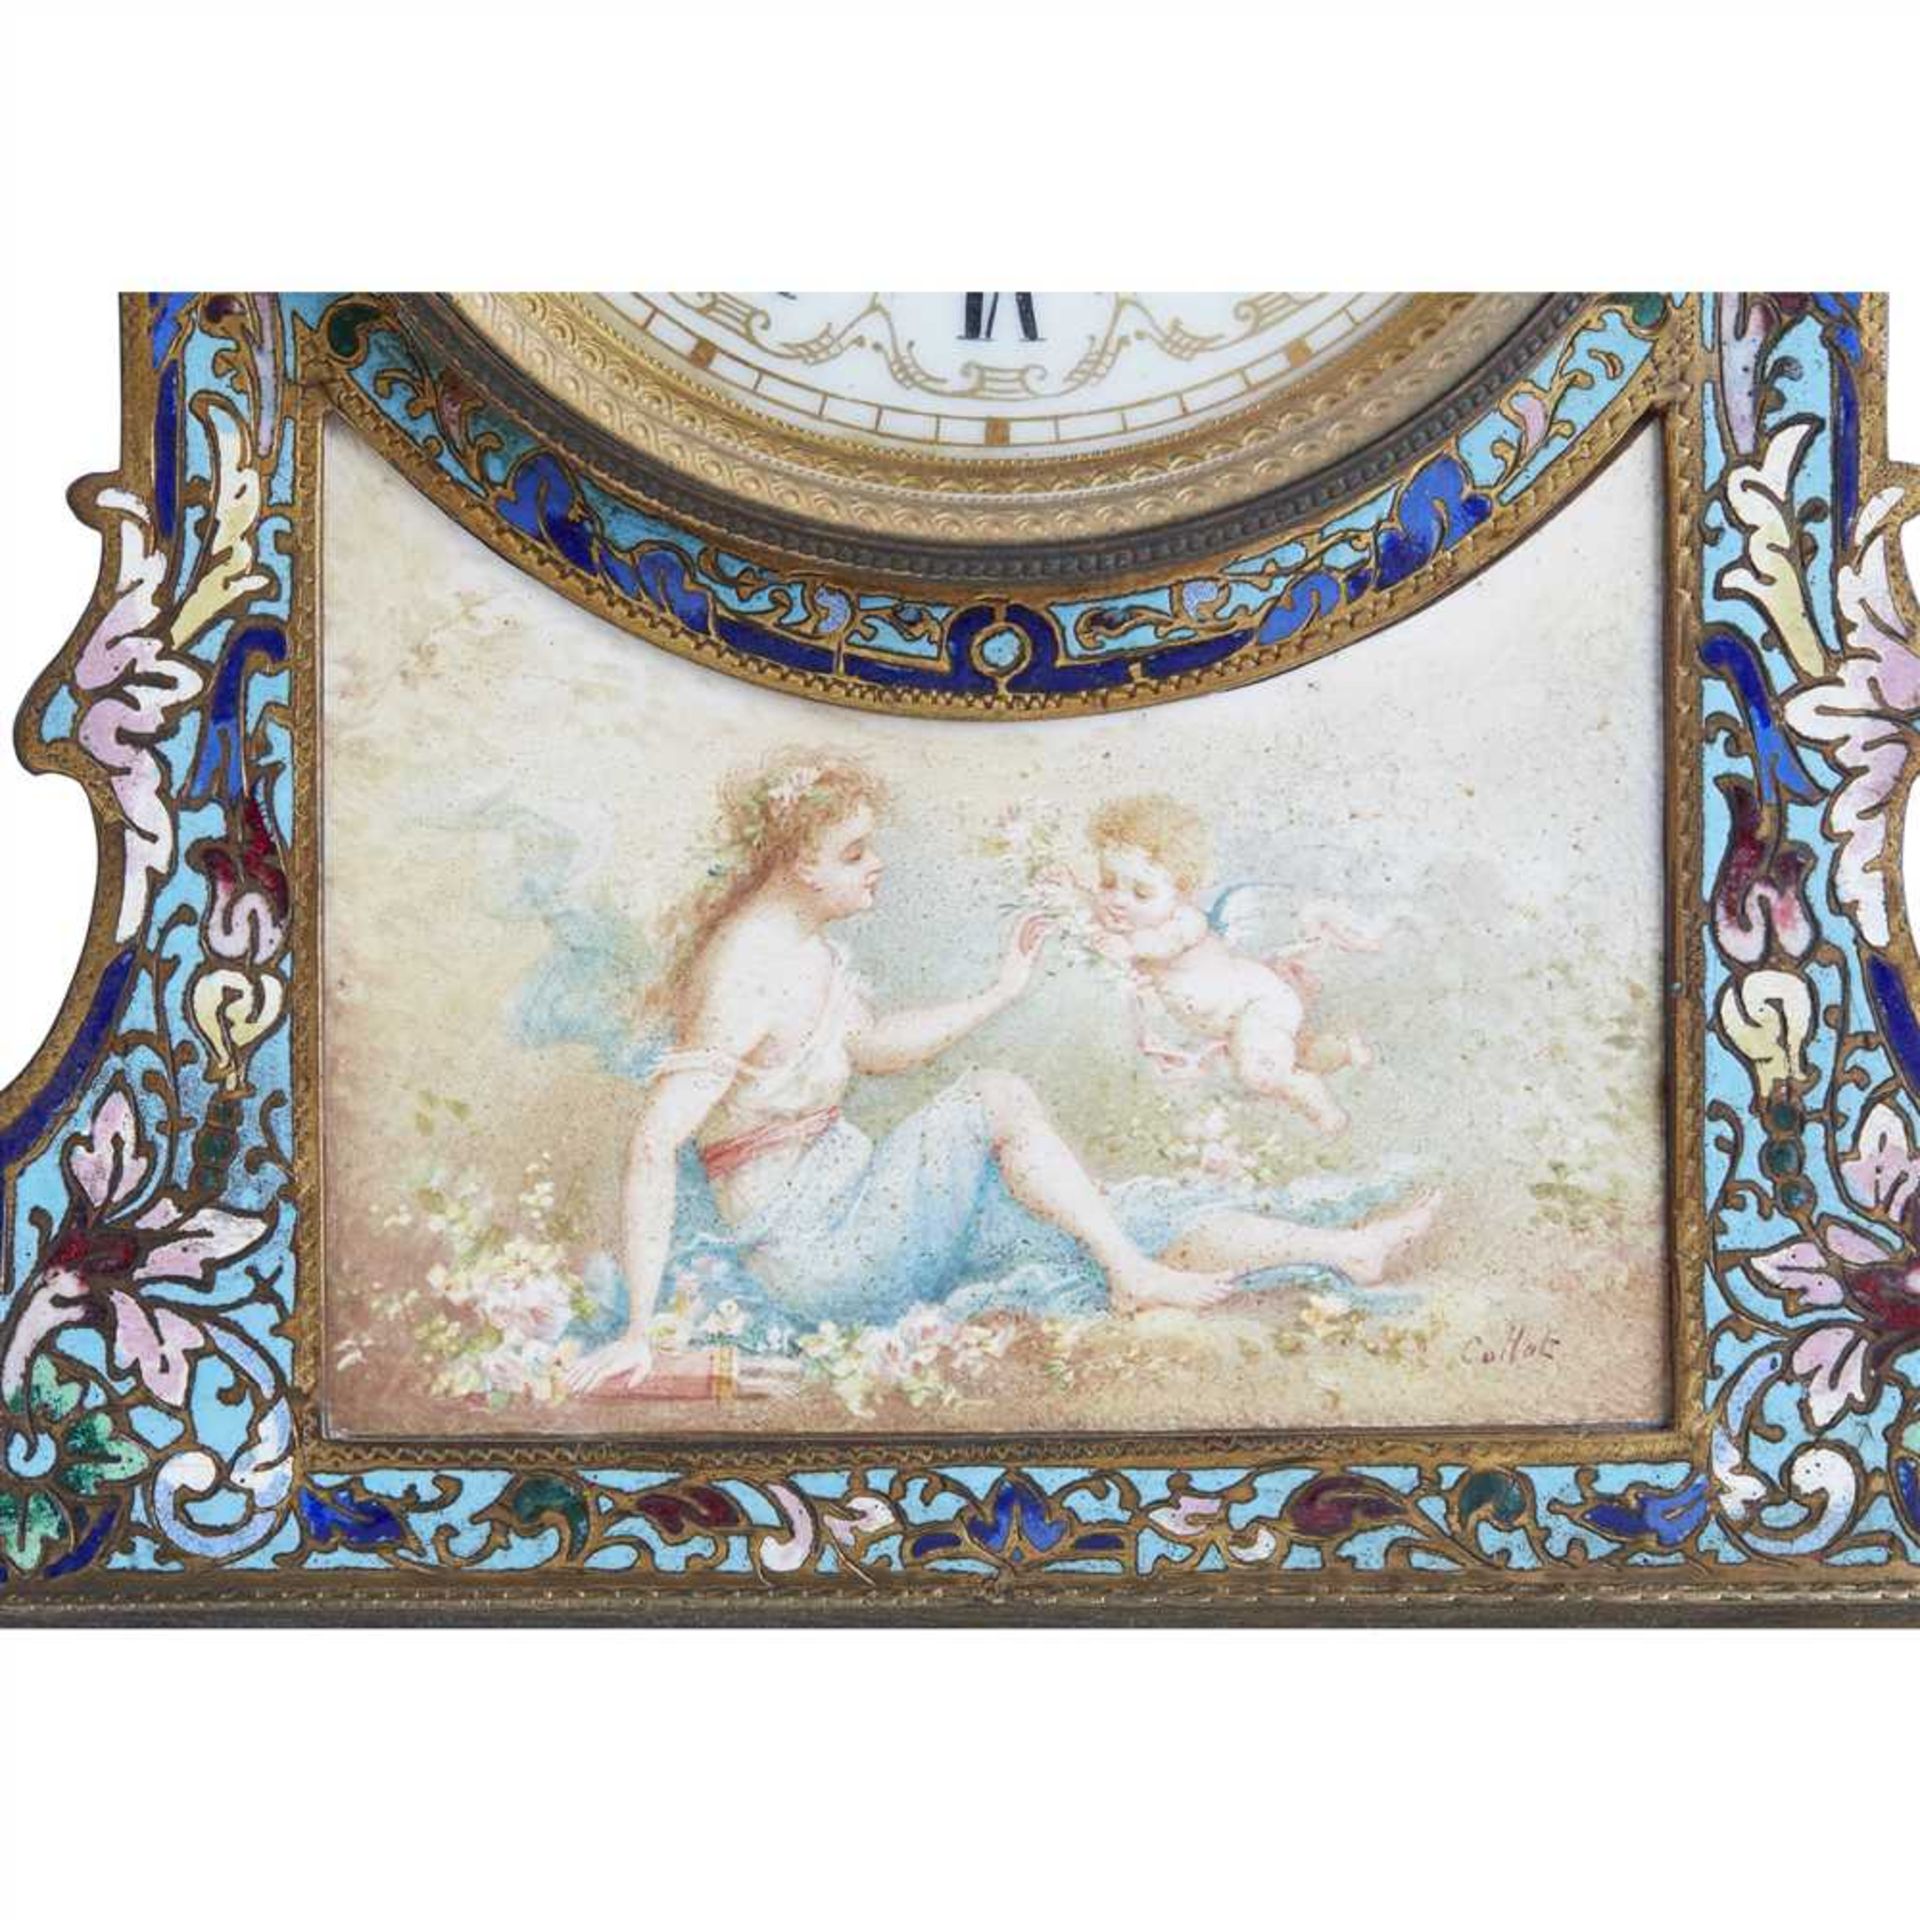 FRENCH CHAMPLEVÉ ENAMEL MANTEL CLOCK LATE 19TH CENTURY - Image 7 of 7